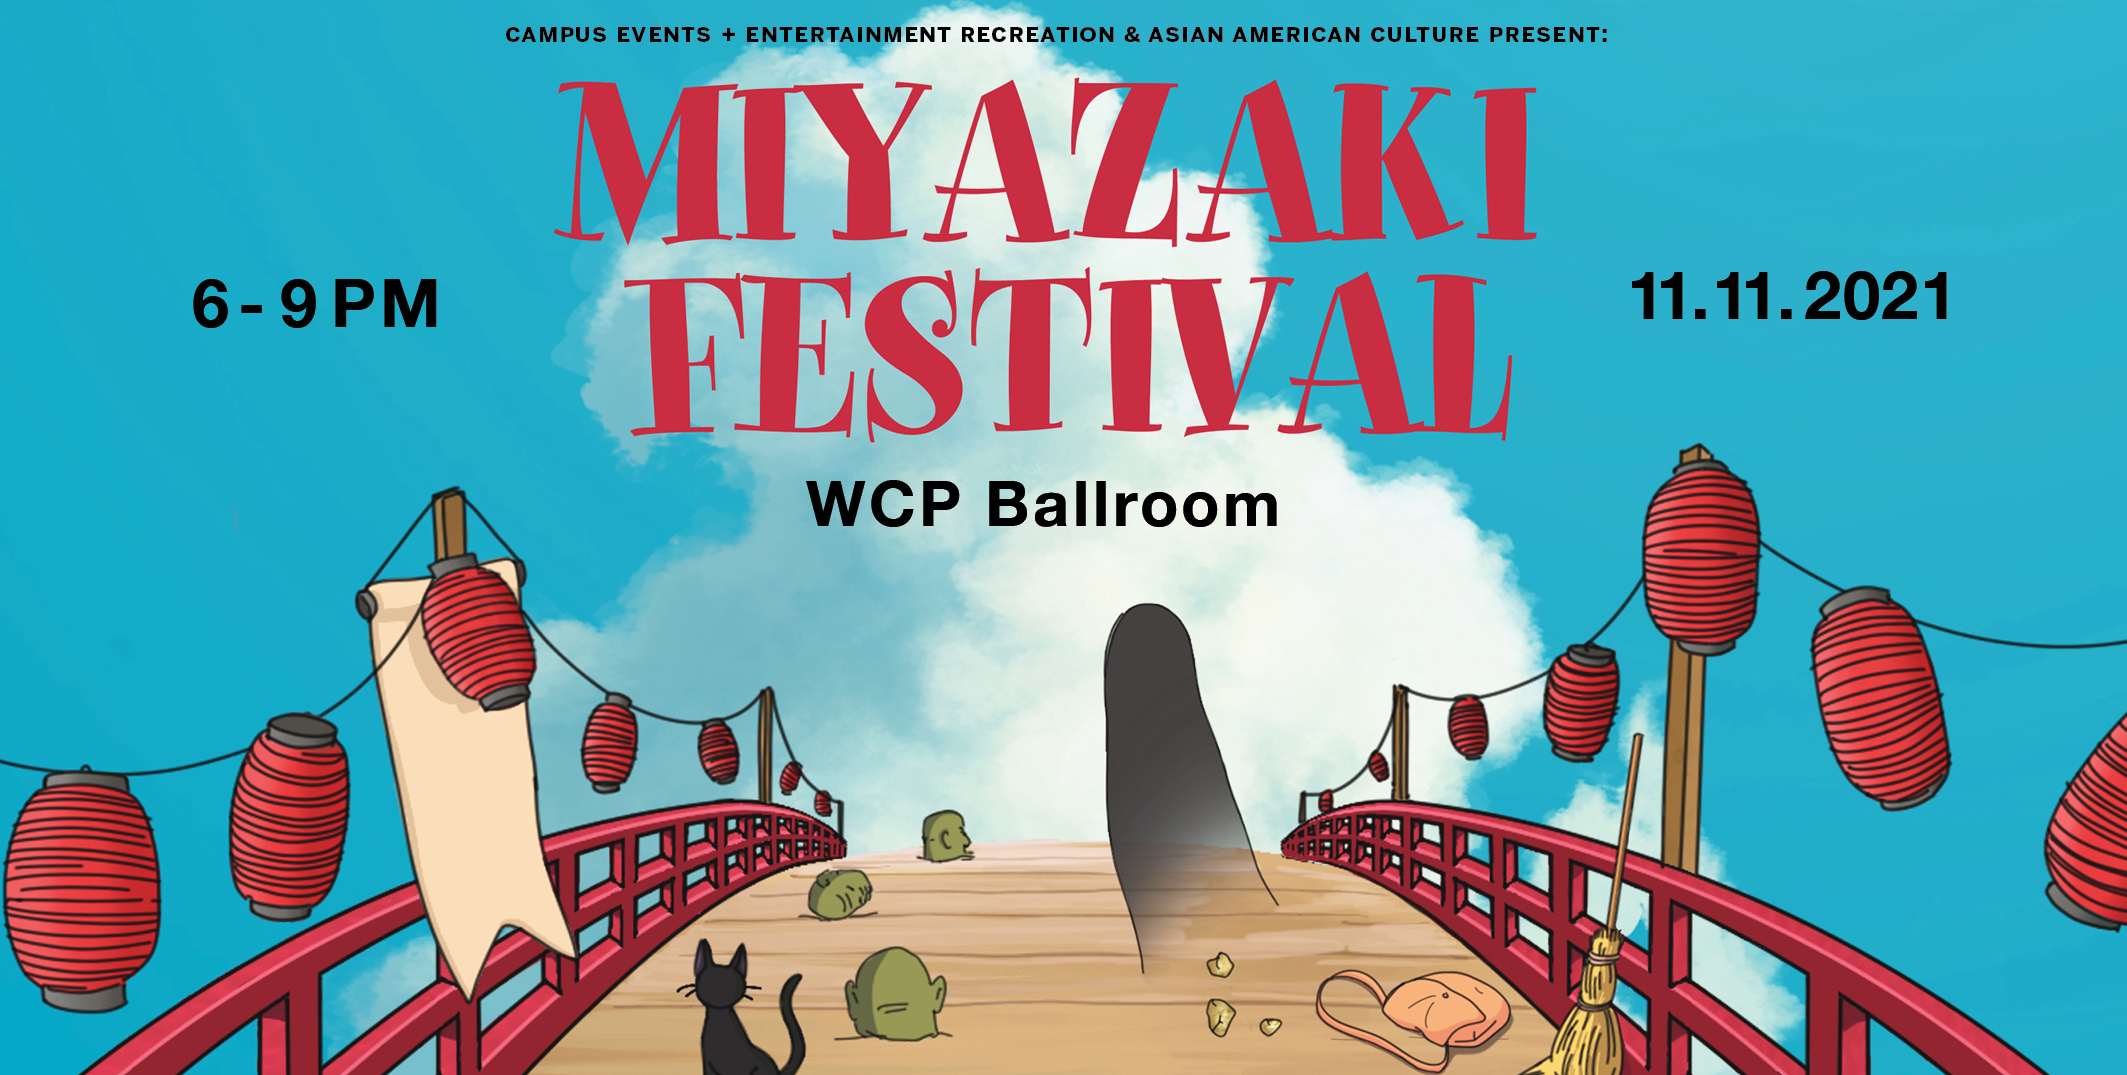 Graphic describing REC and AAC's Miyazaki Festival event, which depicts a red bridge with images of Miyazaki characters around it, along with a cloudy blue sky